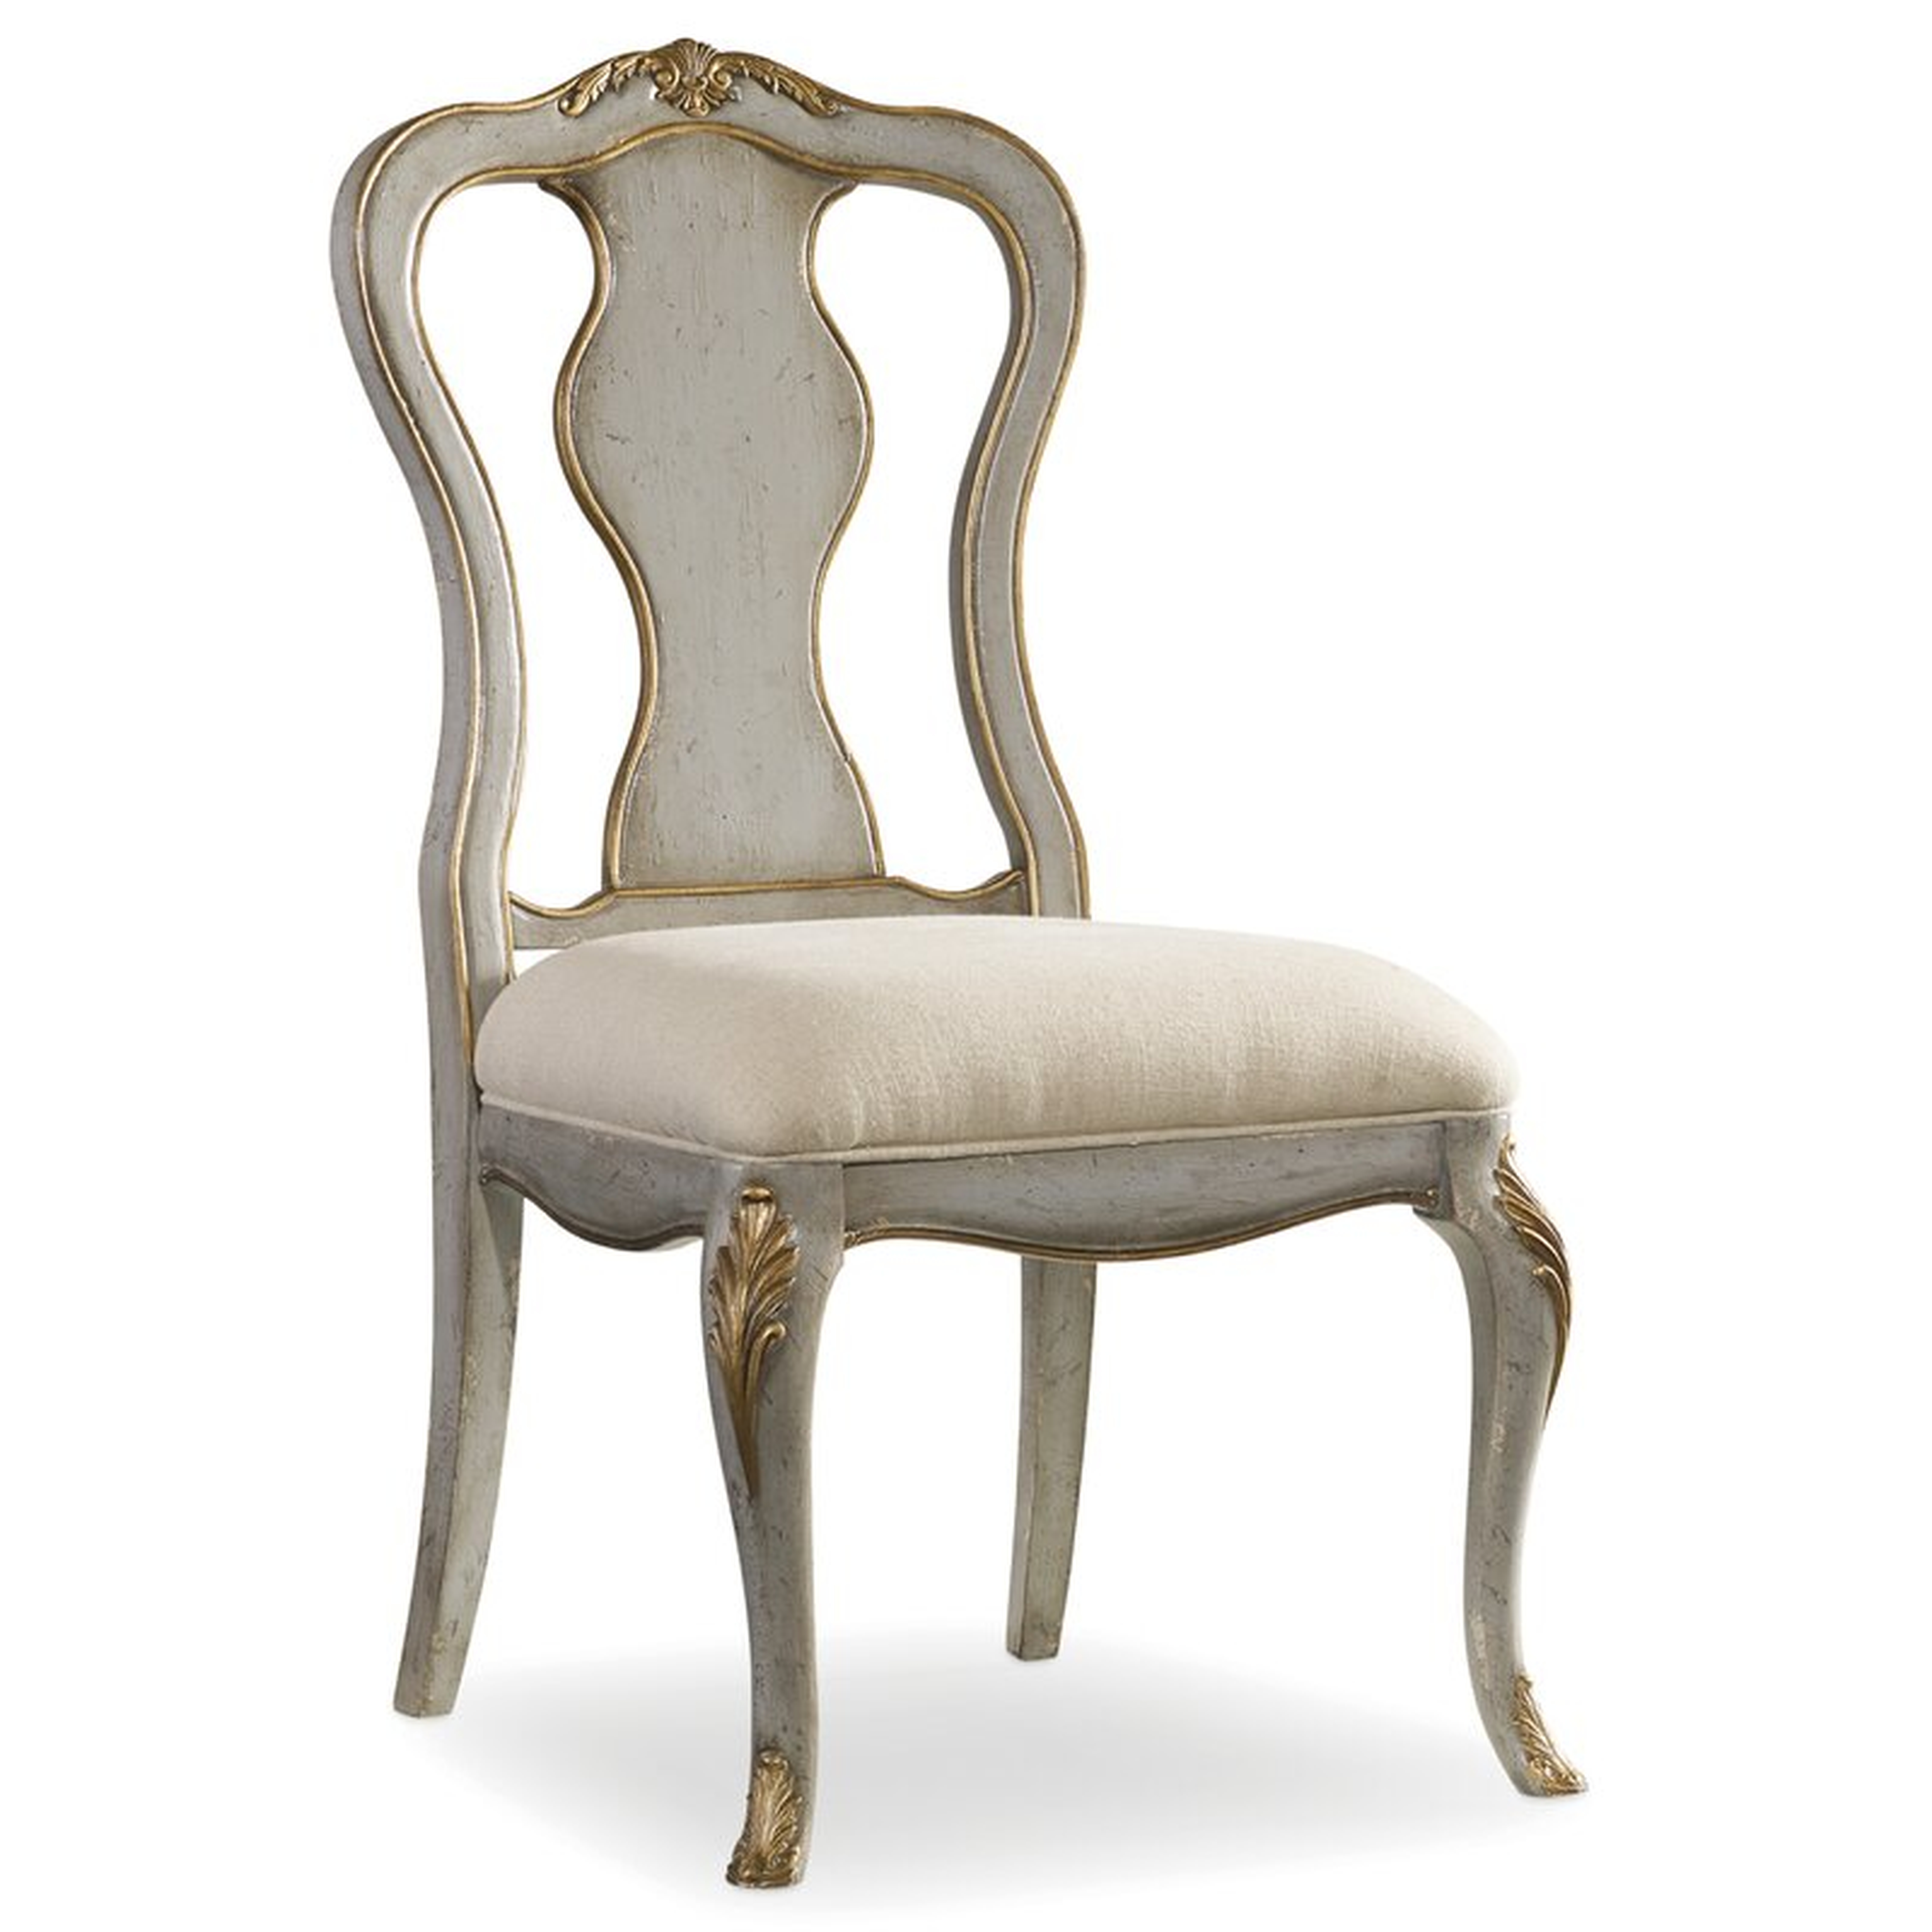 Upholstered Dining Chair - Perigold